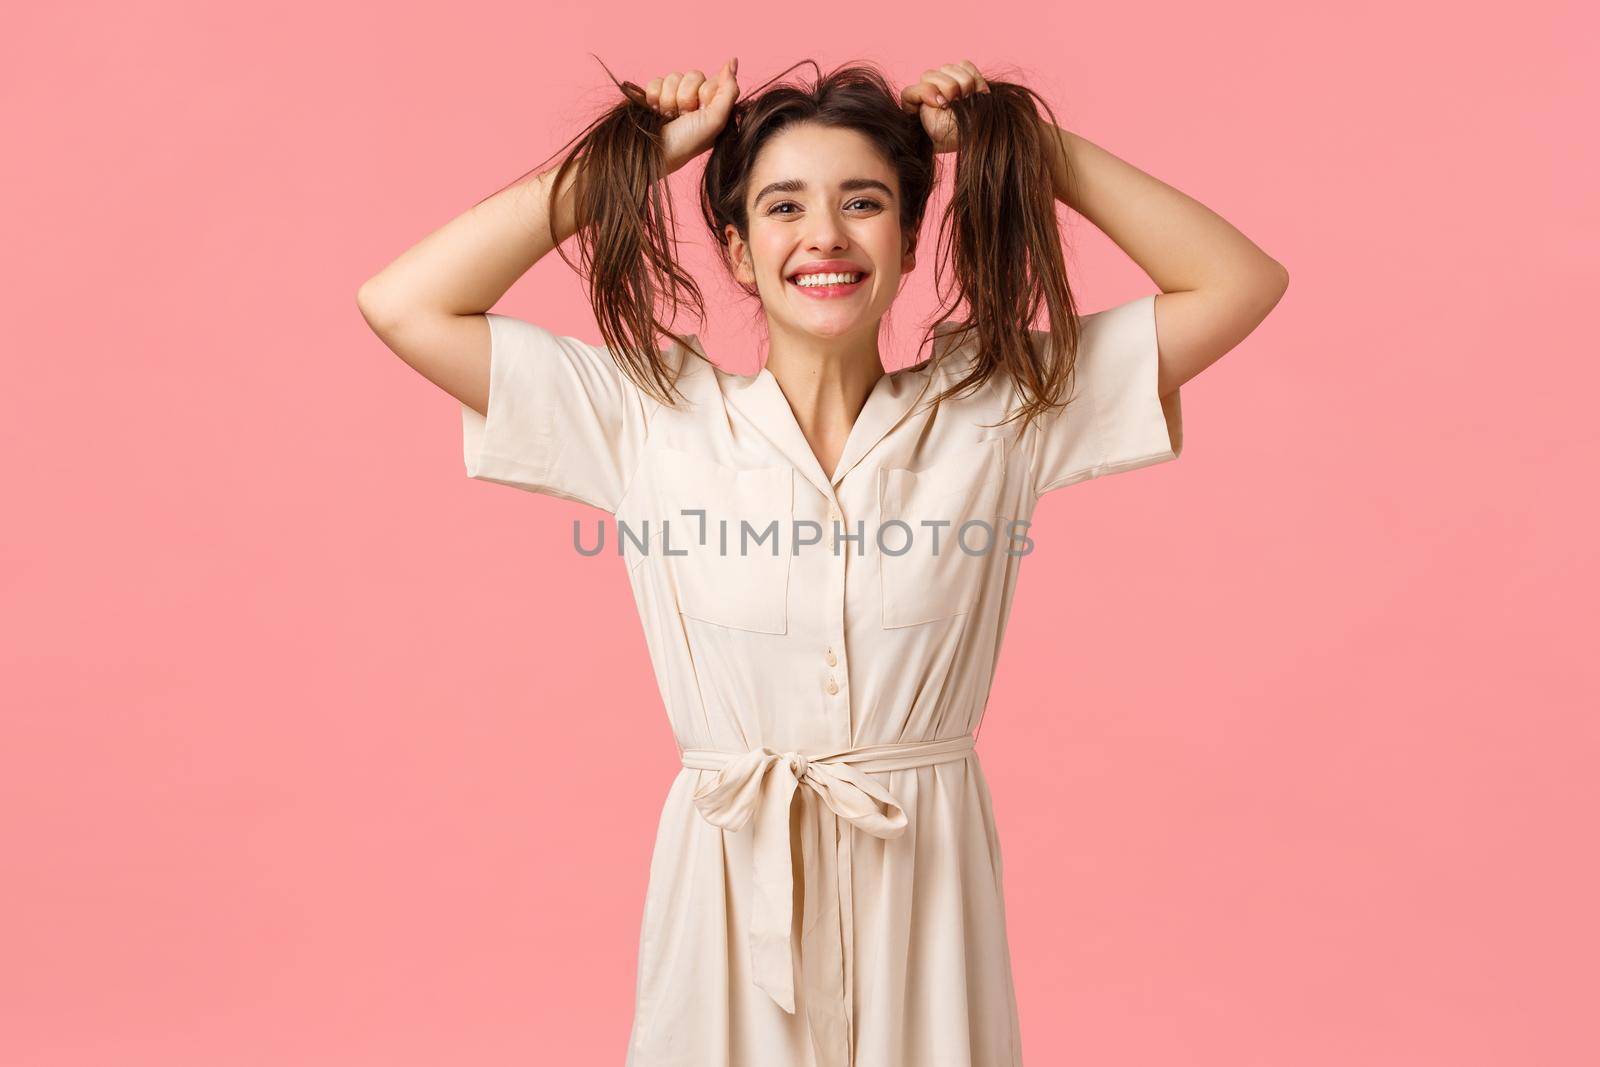 Joy, party and happiness concept. Silly funny girl having fun fooling around, pulling hair sideways making it messy, smiling cheerfull, enjoy perfect day feeling amused and upbeat, pink background.